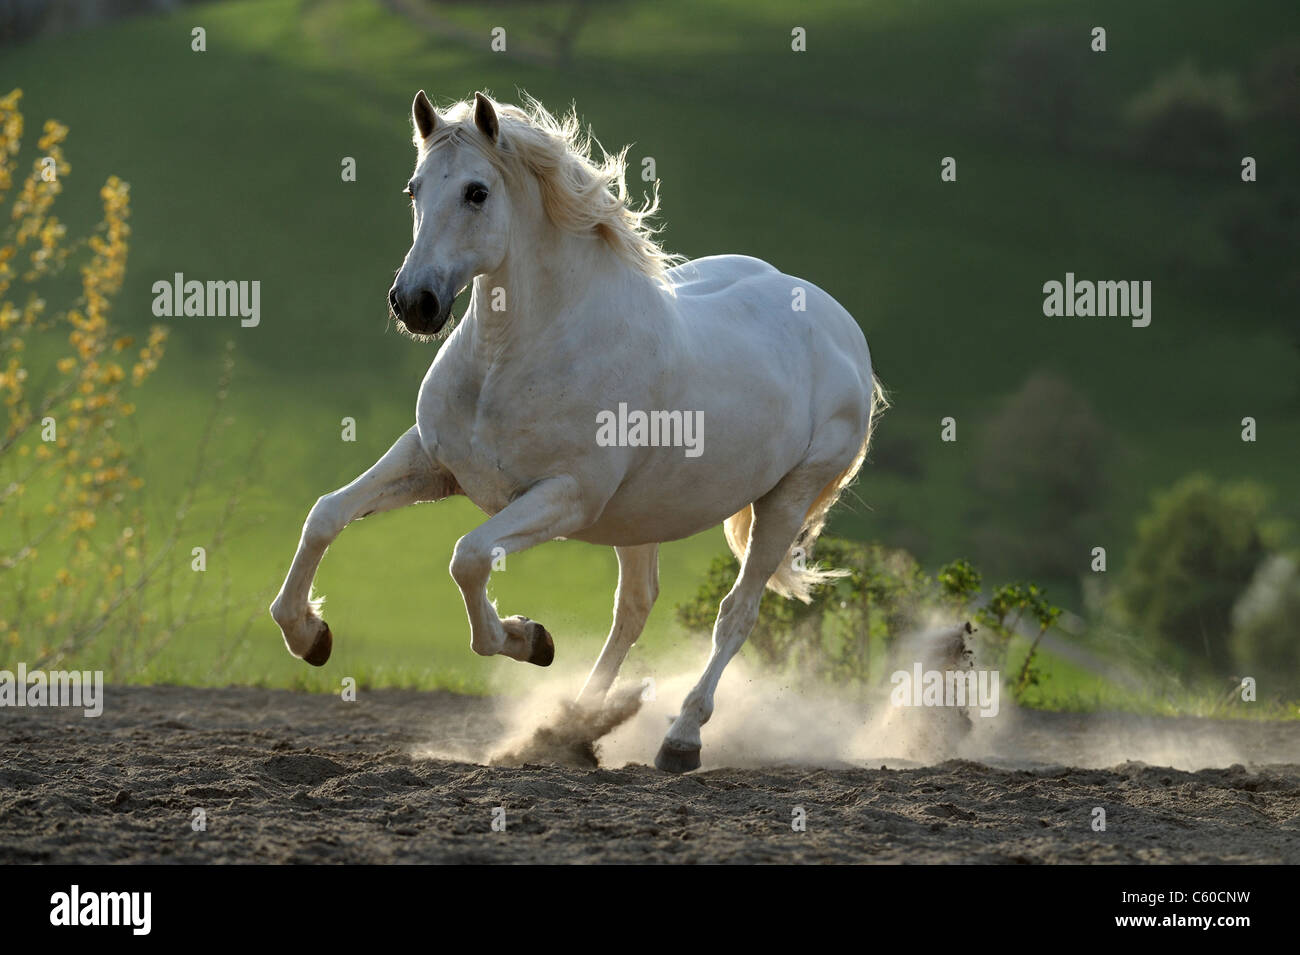 Andalusian Horse (Equus ferus caballus). Gray gelding in a gallop in a dusty paddock. Stock Photo